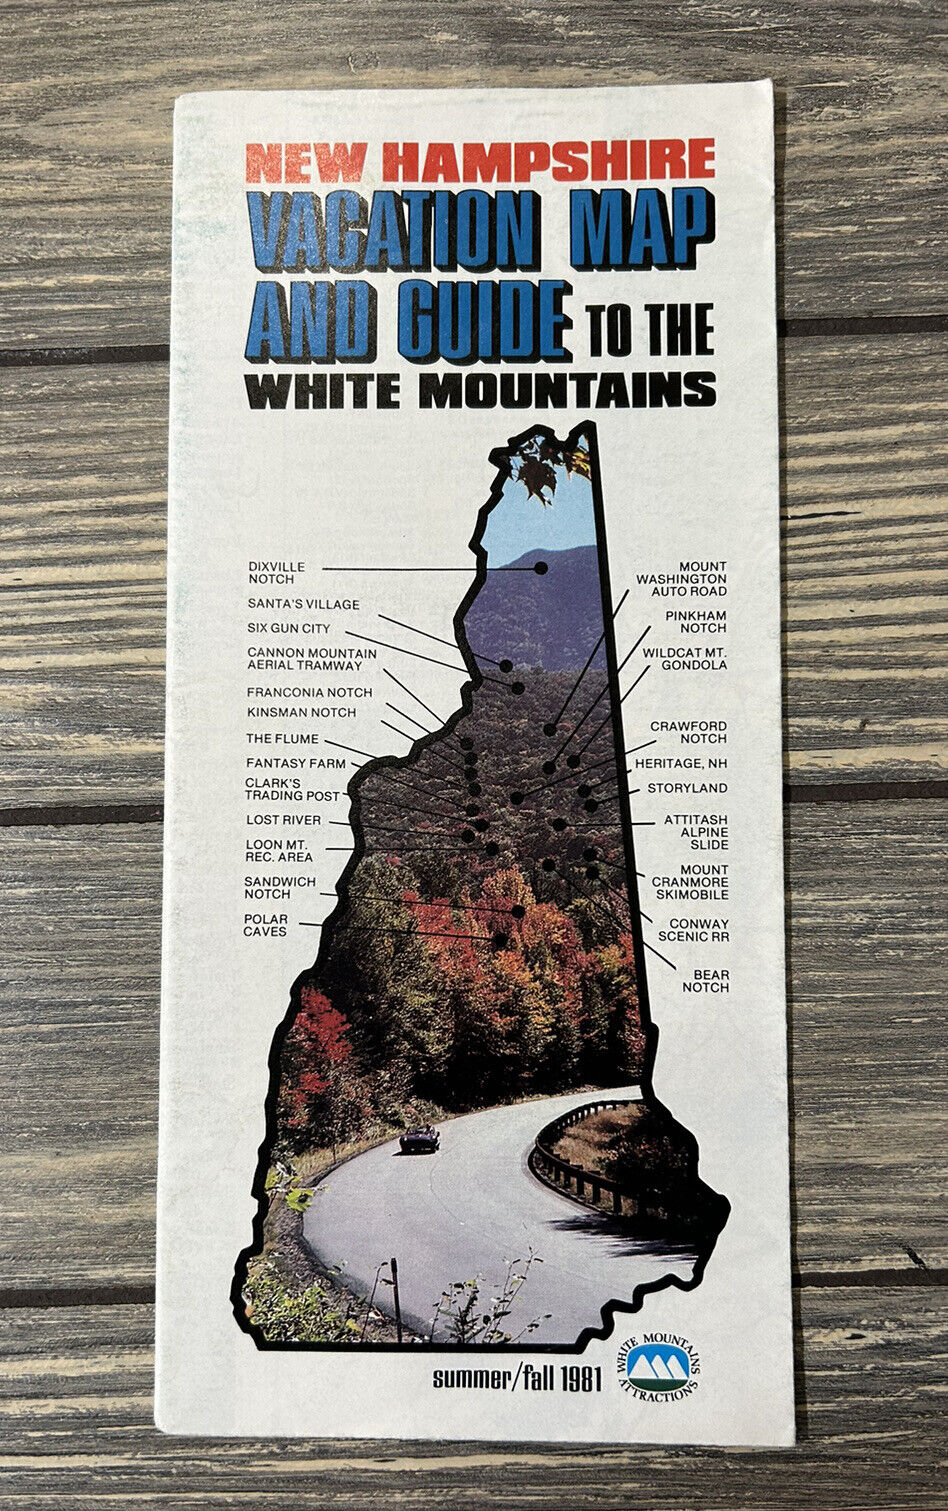 Vintage New Hampshire Vacation Map And Guide To The White Mountains Brochure 